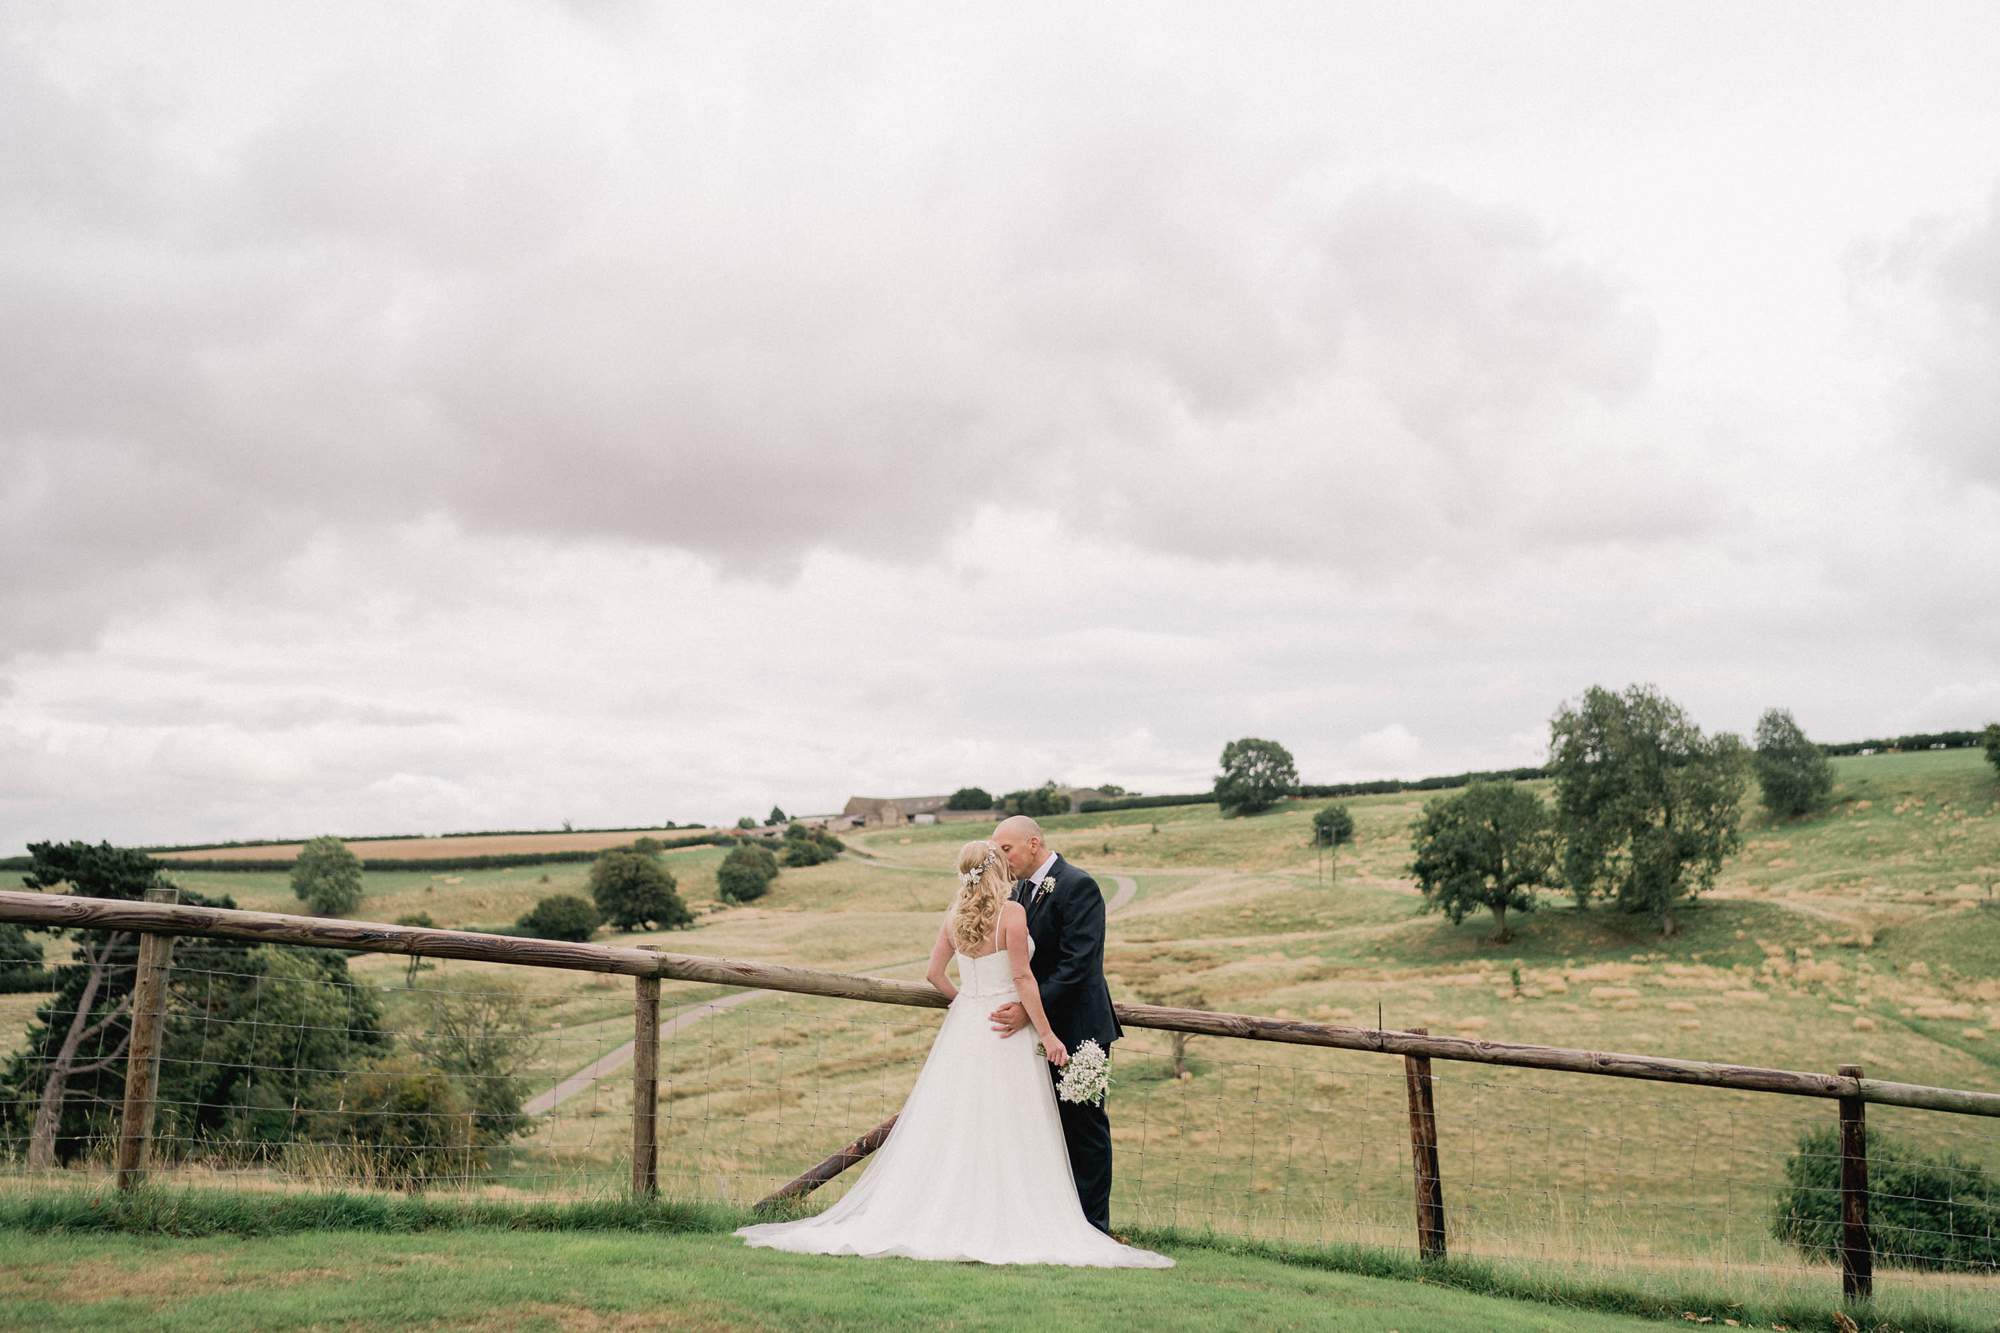 Bride and groom on their wedding day at Kingscote Barn in Gloucestershire